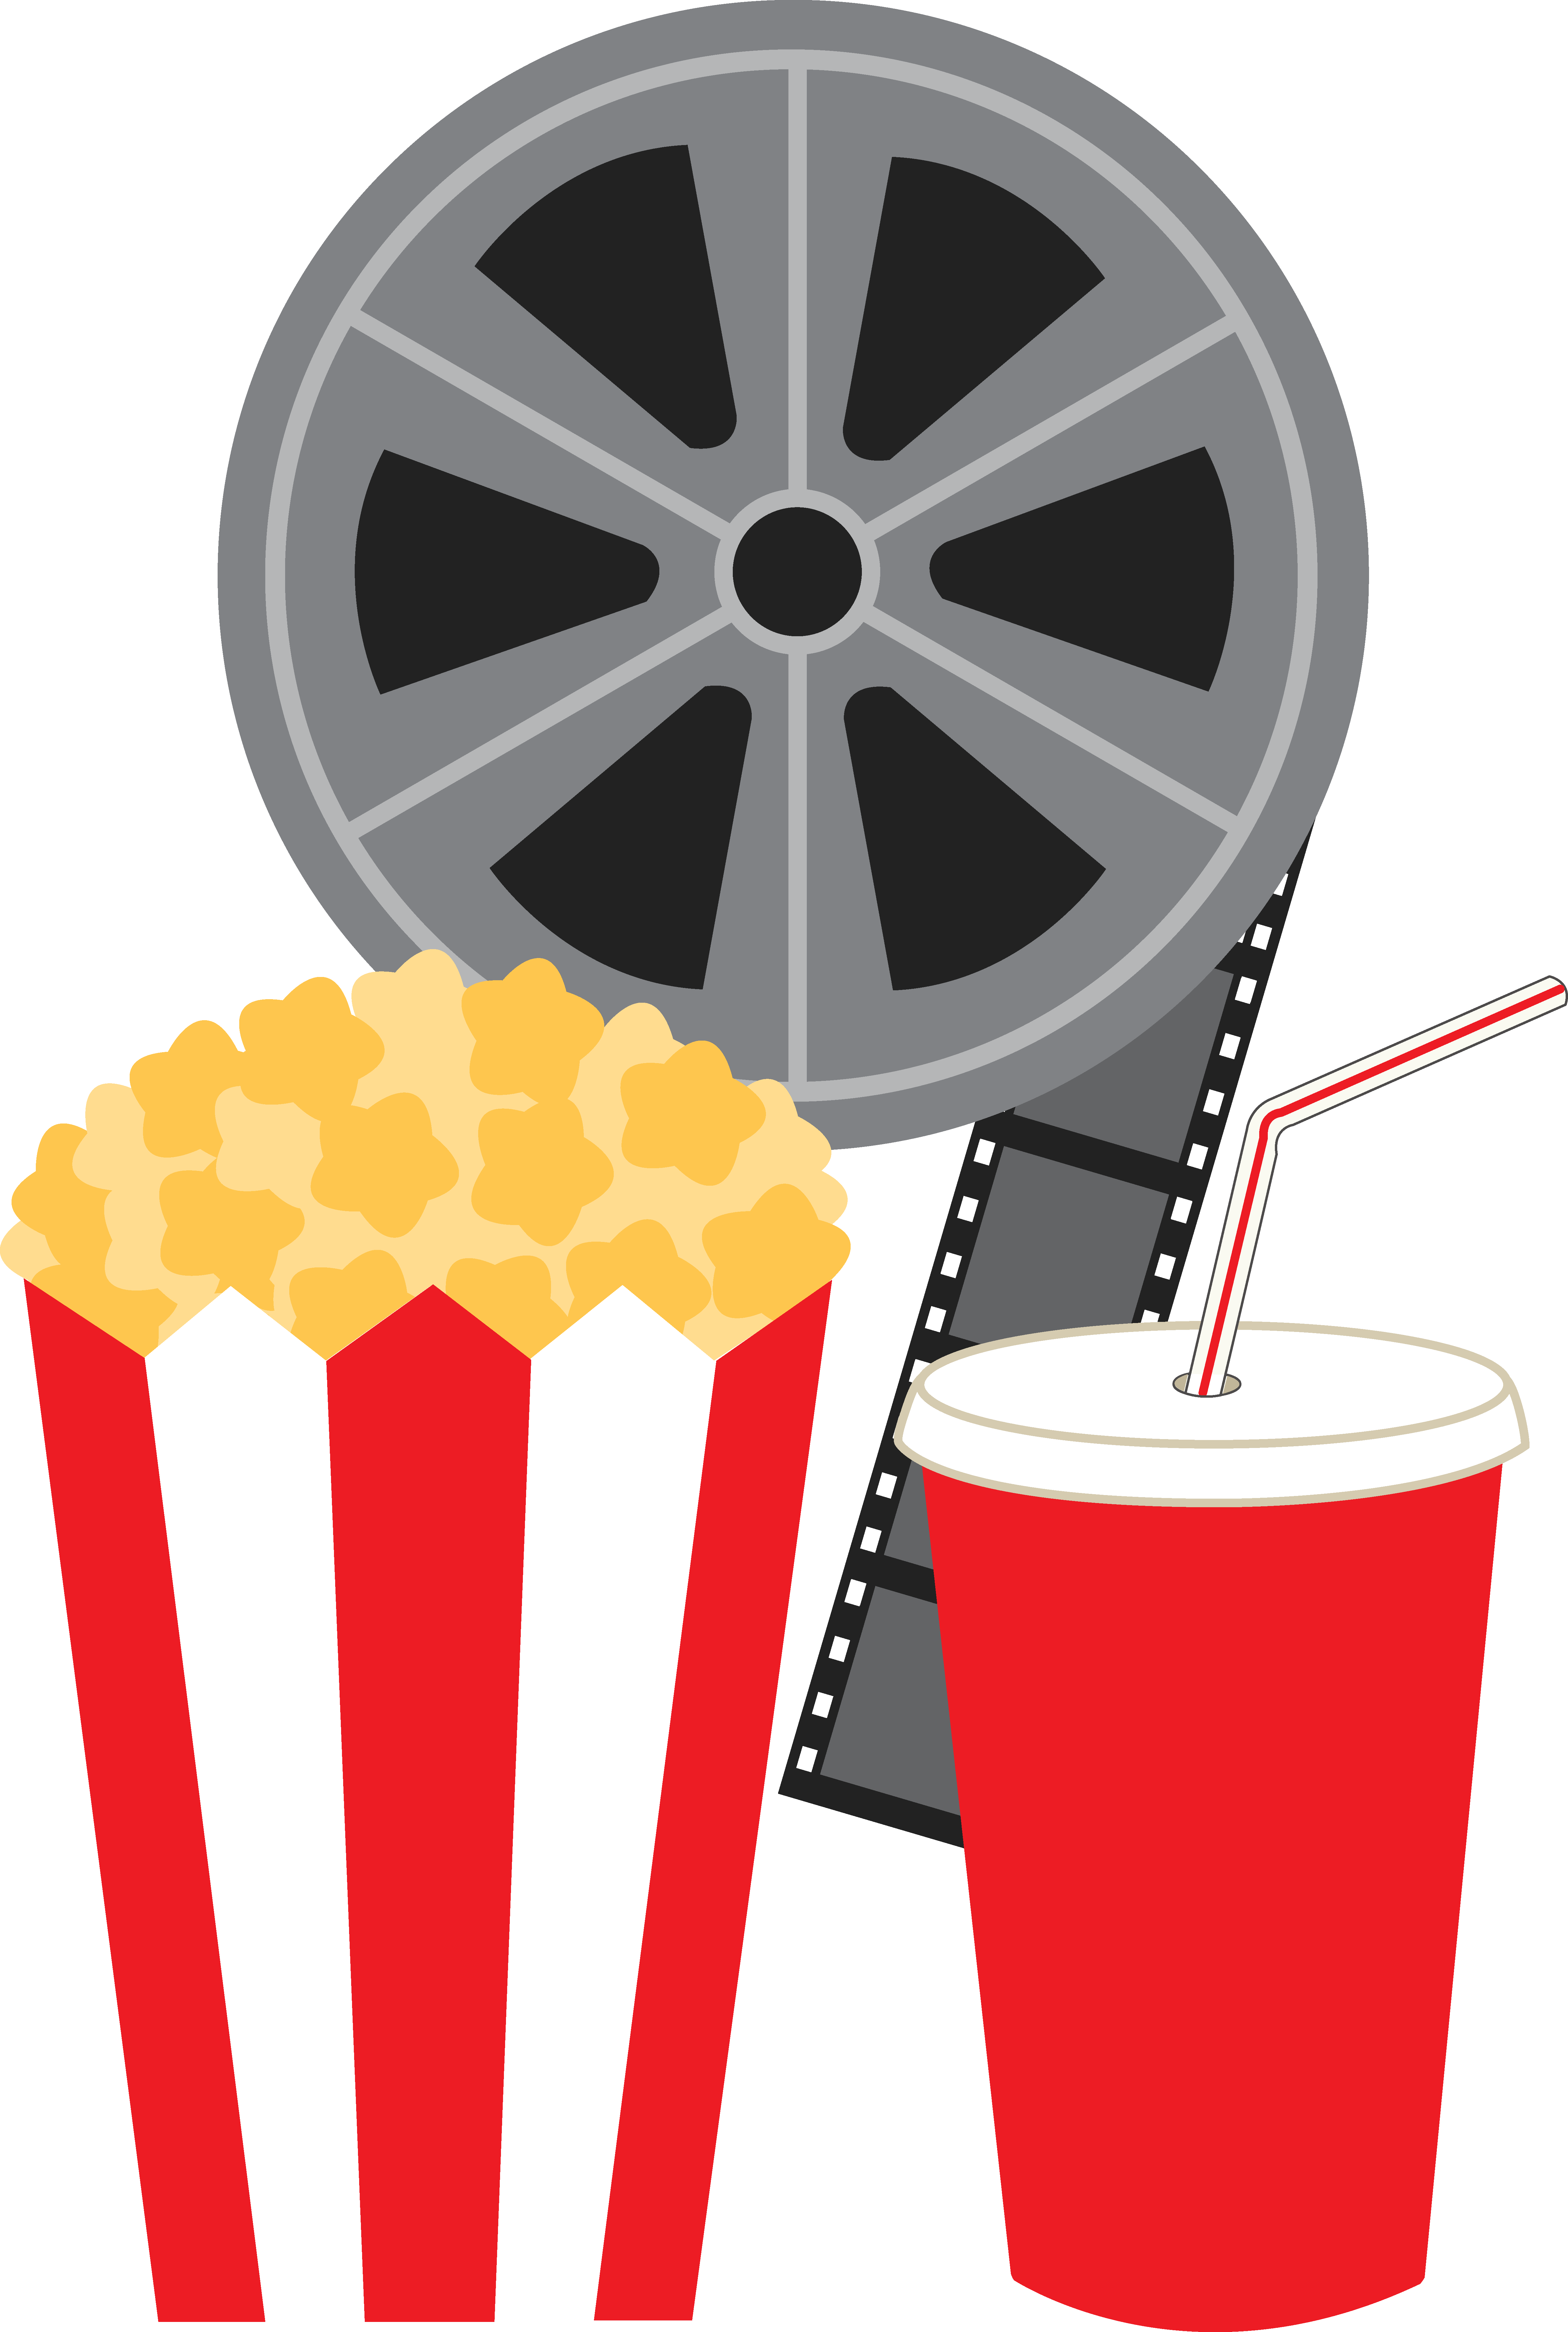 Youtube clipart movie. Free clip art stickers